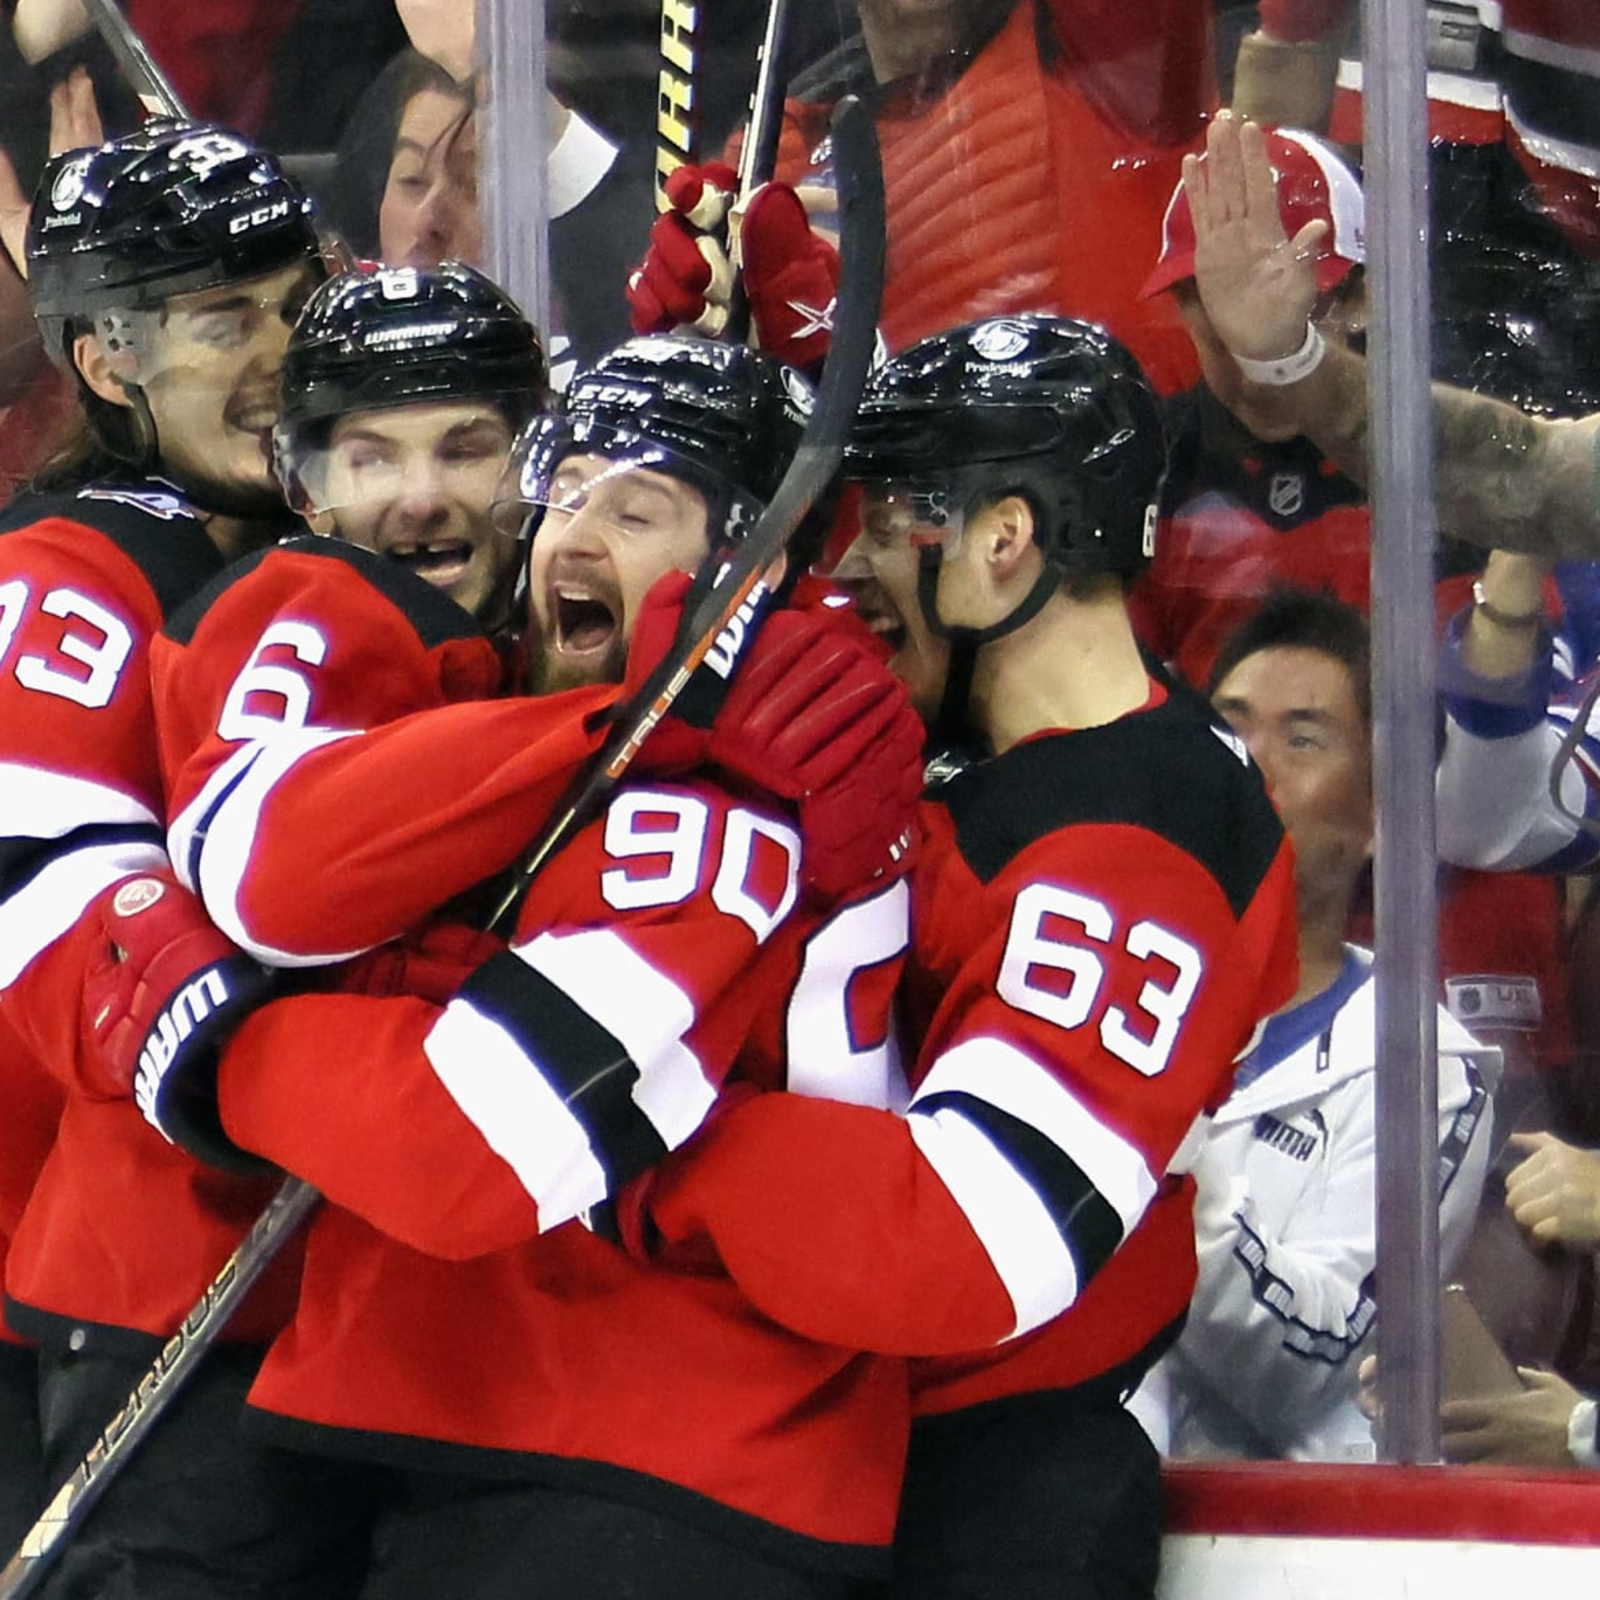 Devils crumble in 5-2 loss to Rangers to force Game 7 